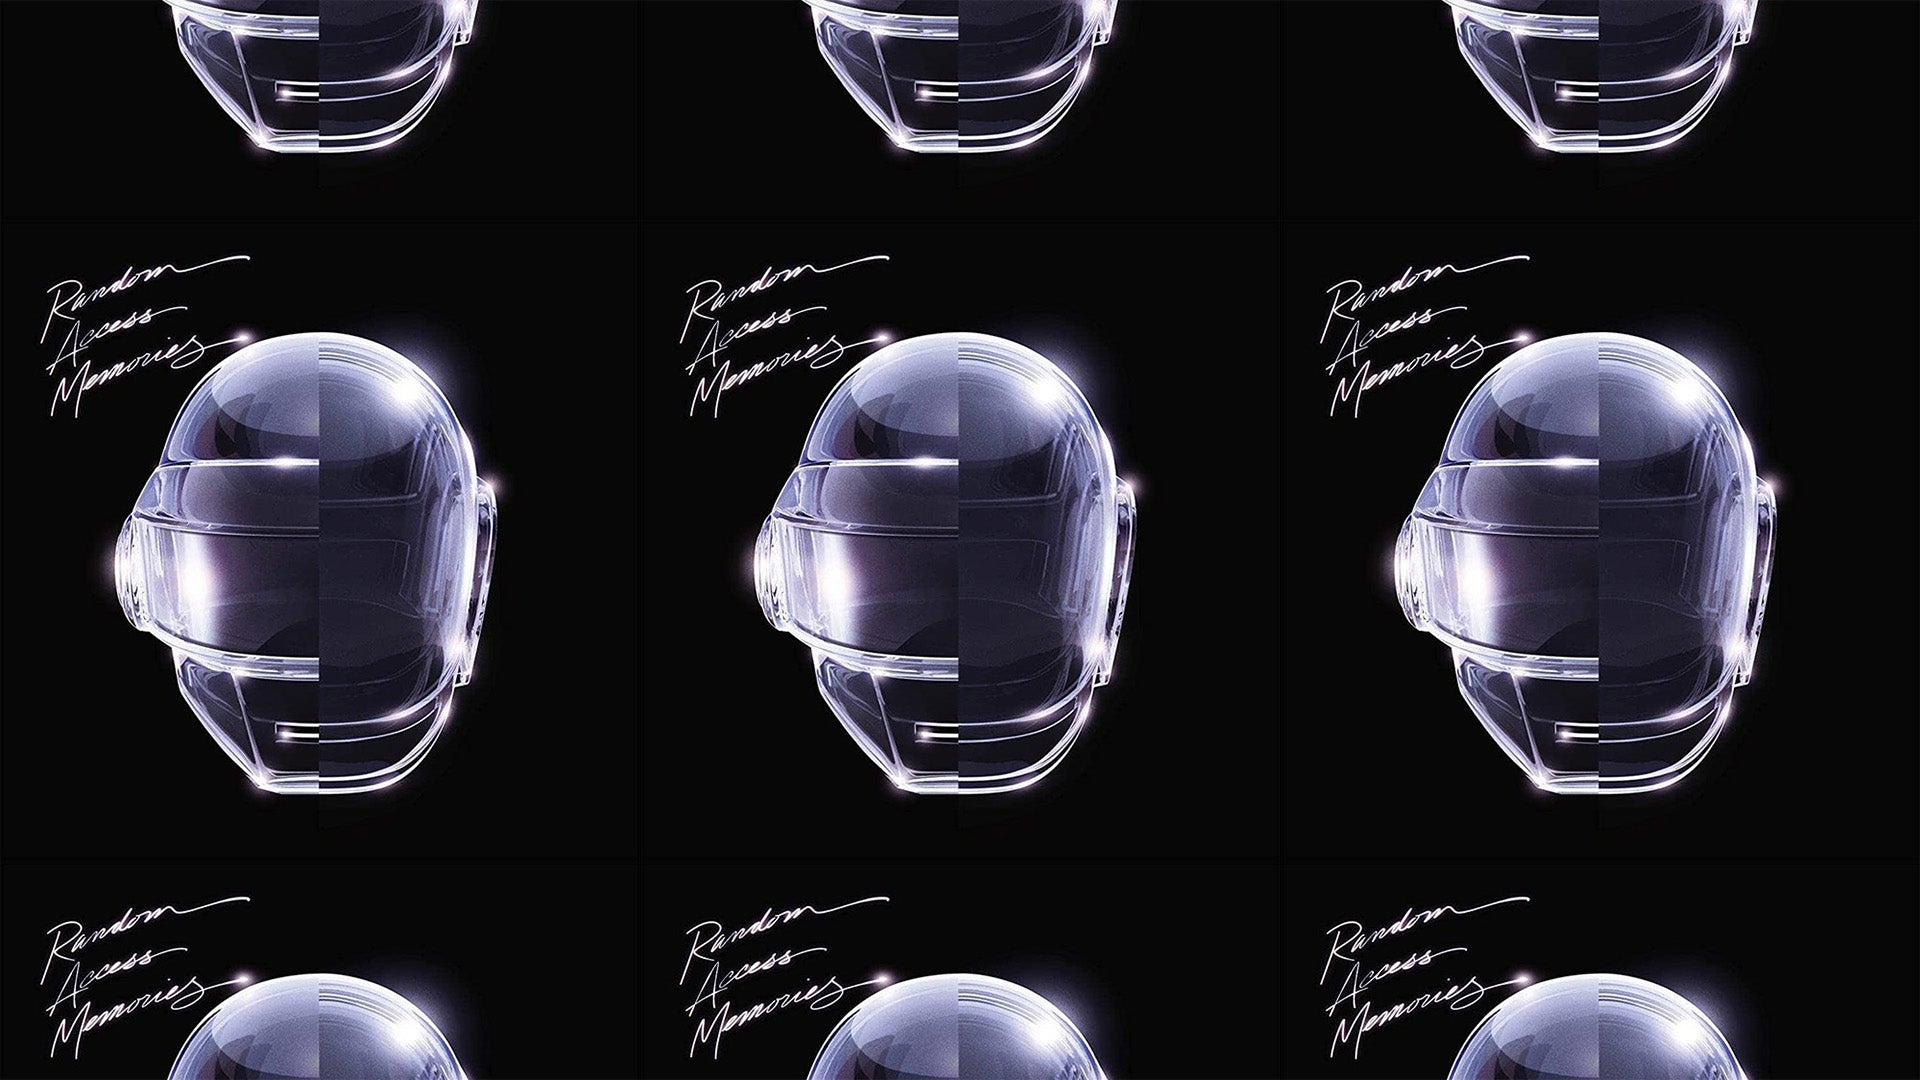 Infinity Repeating (2013 Demo) by Daft Punk (feat. Julian Casablancas+The Voidz) is OUT NOW